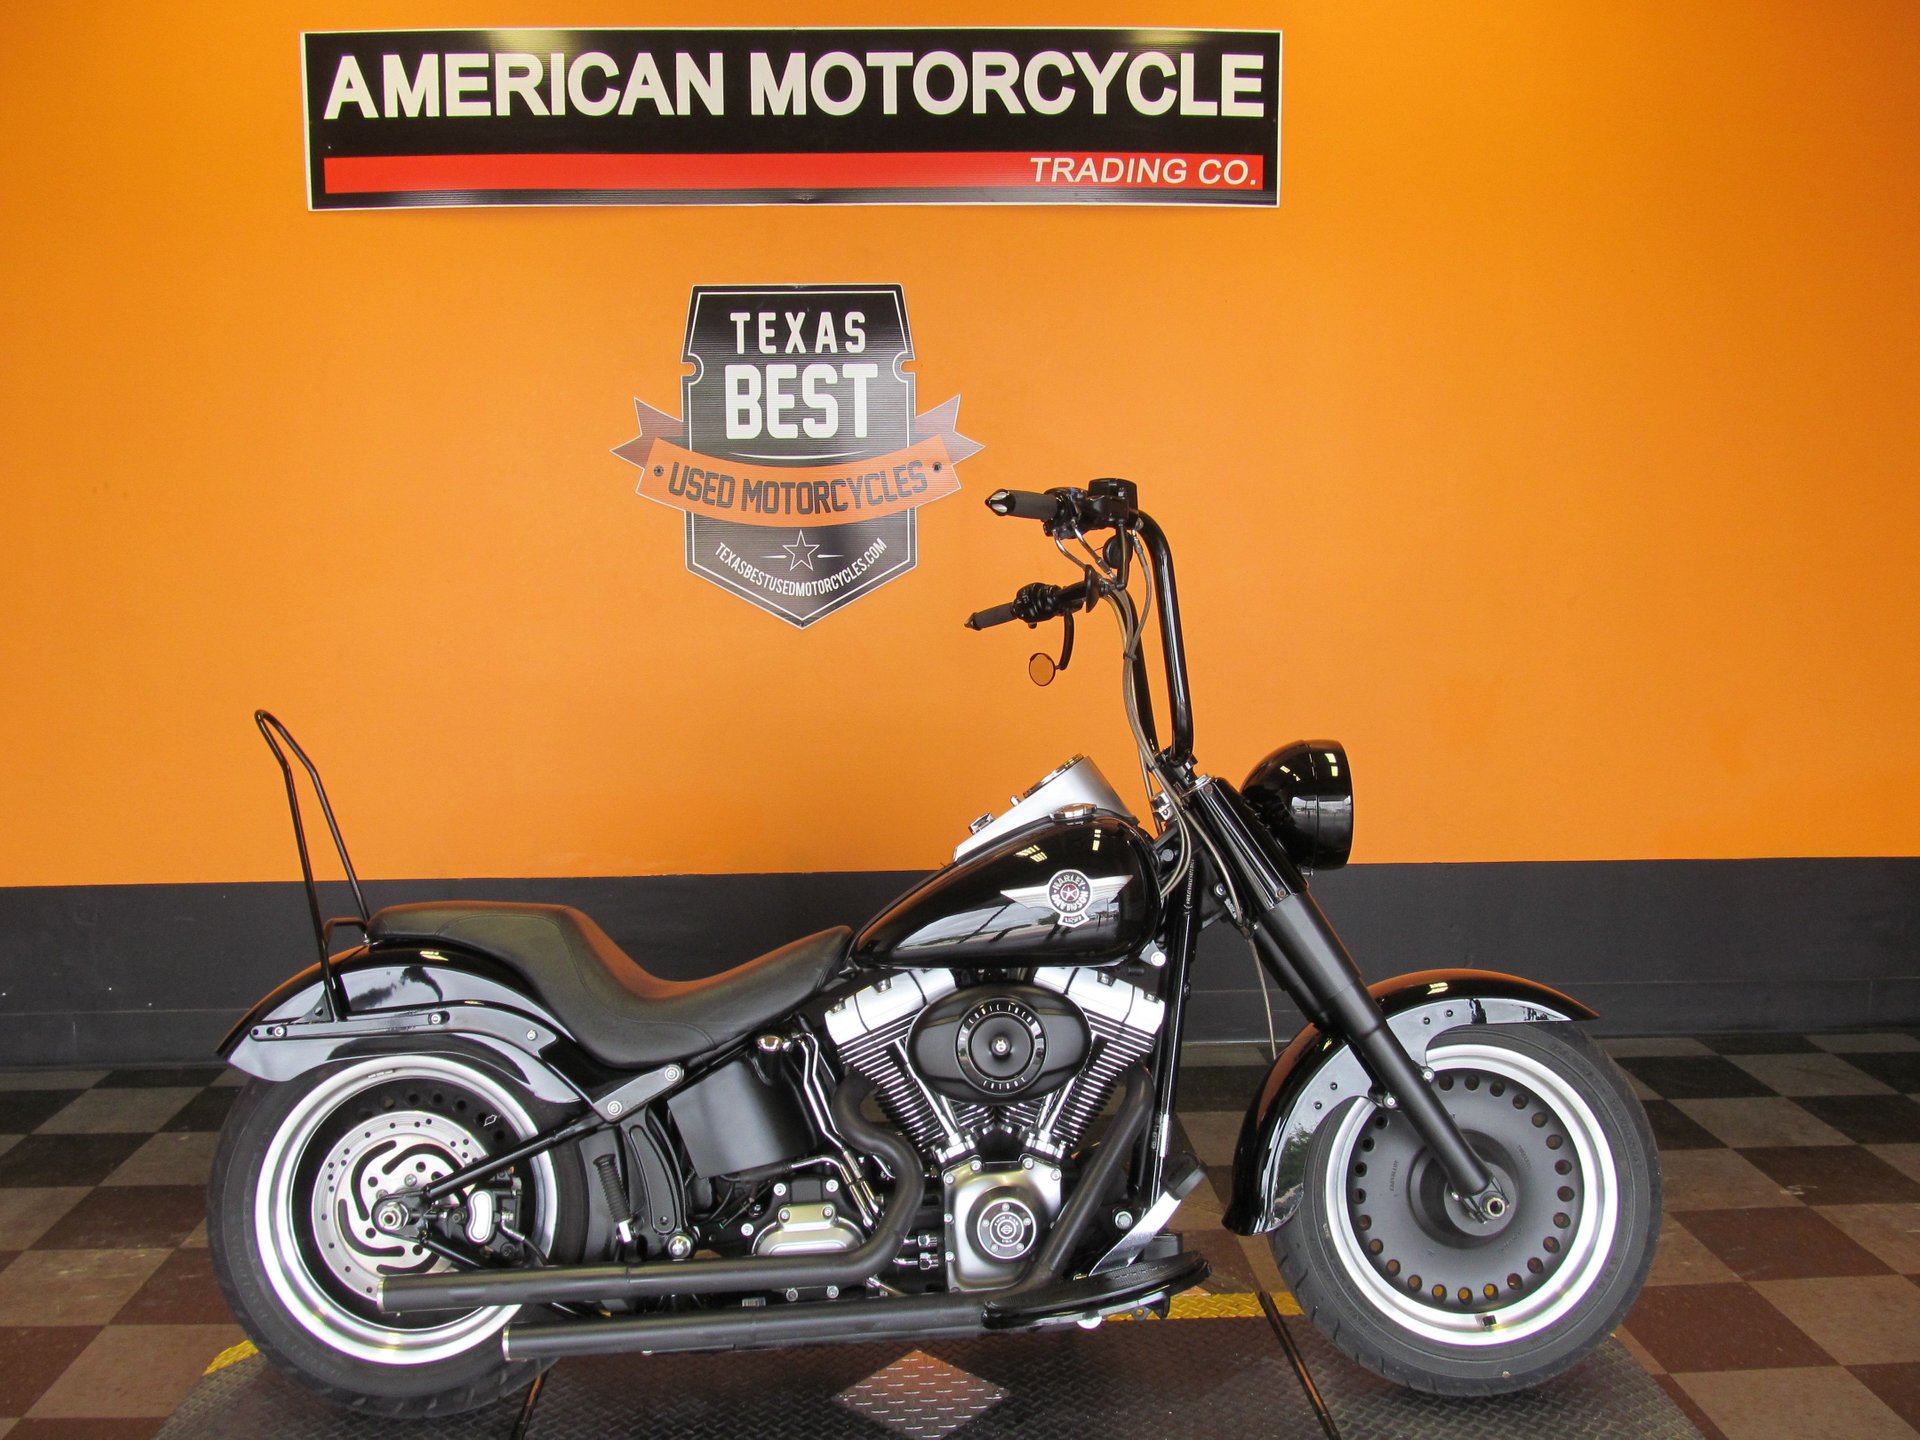 2010 Harley Fatboy For Sale Promotions